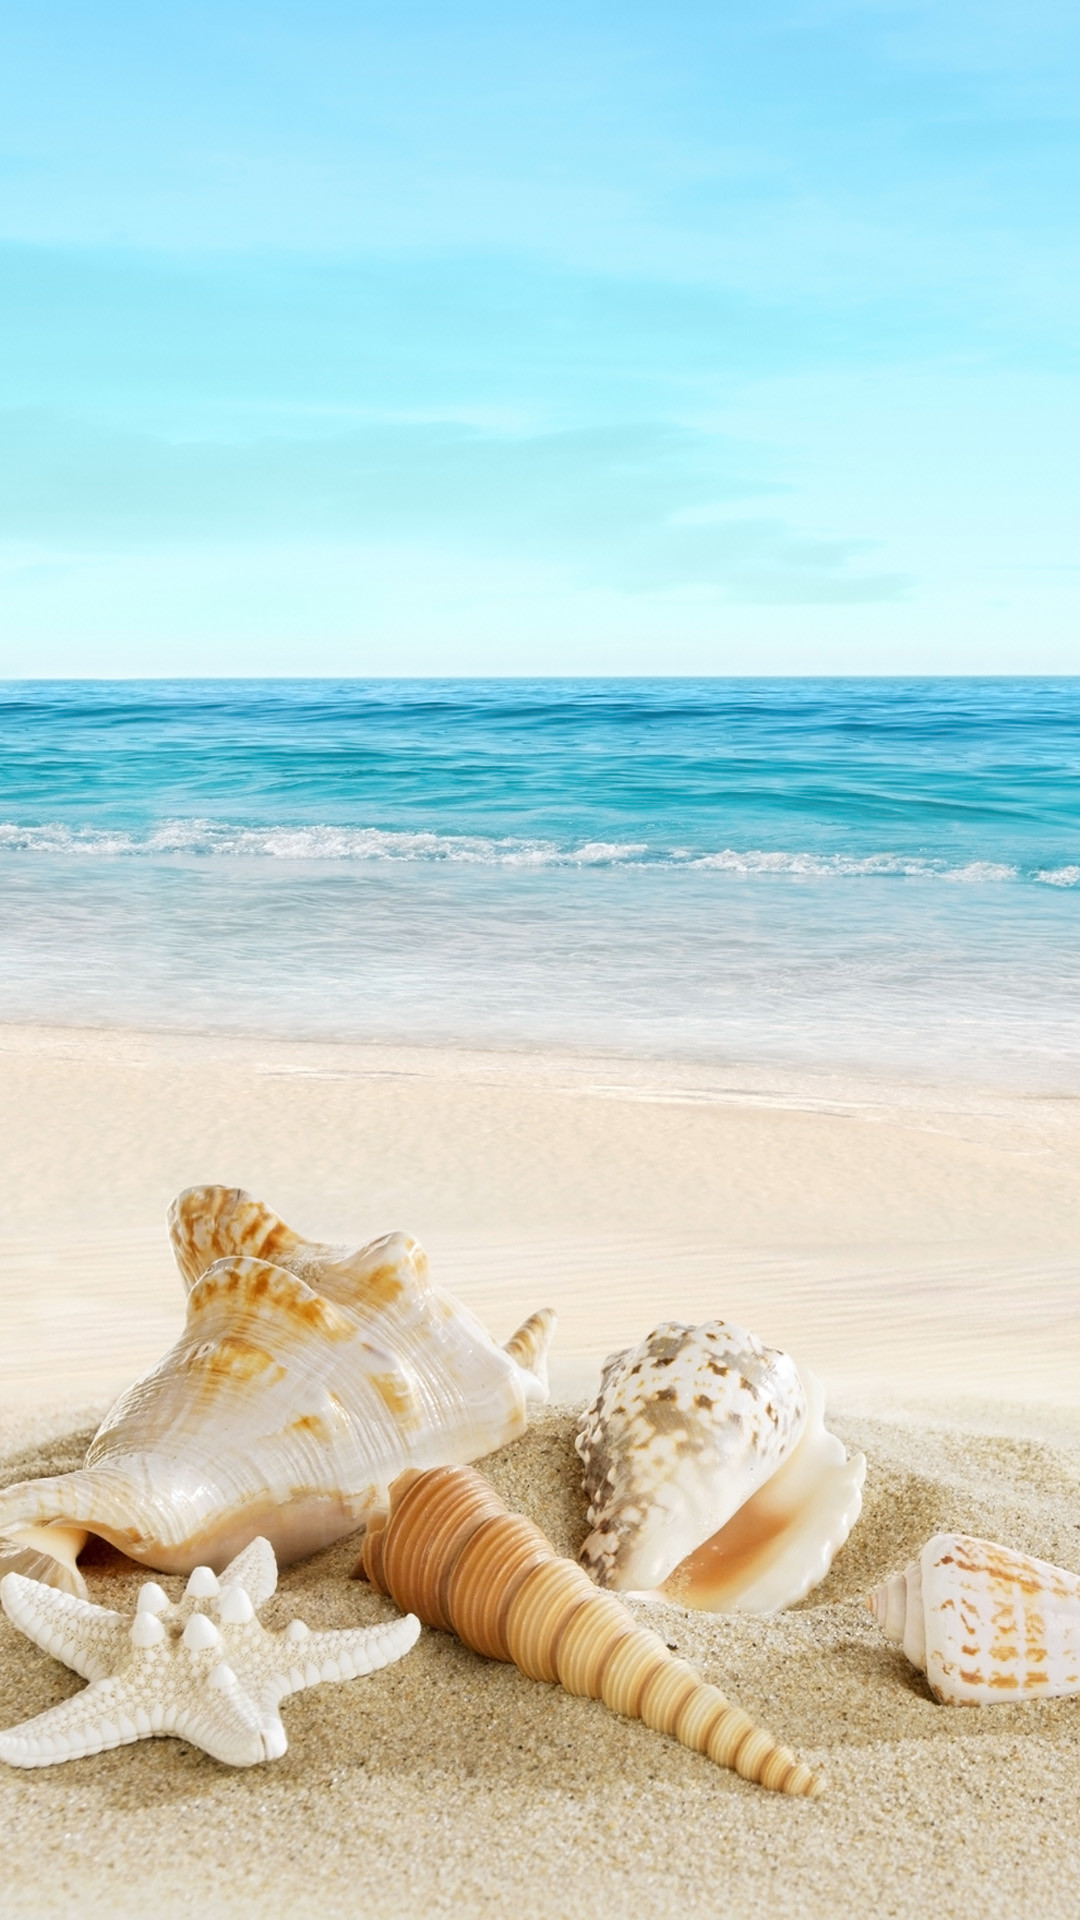 1080x1920 Landscape with shells on tropical beach